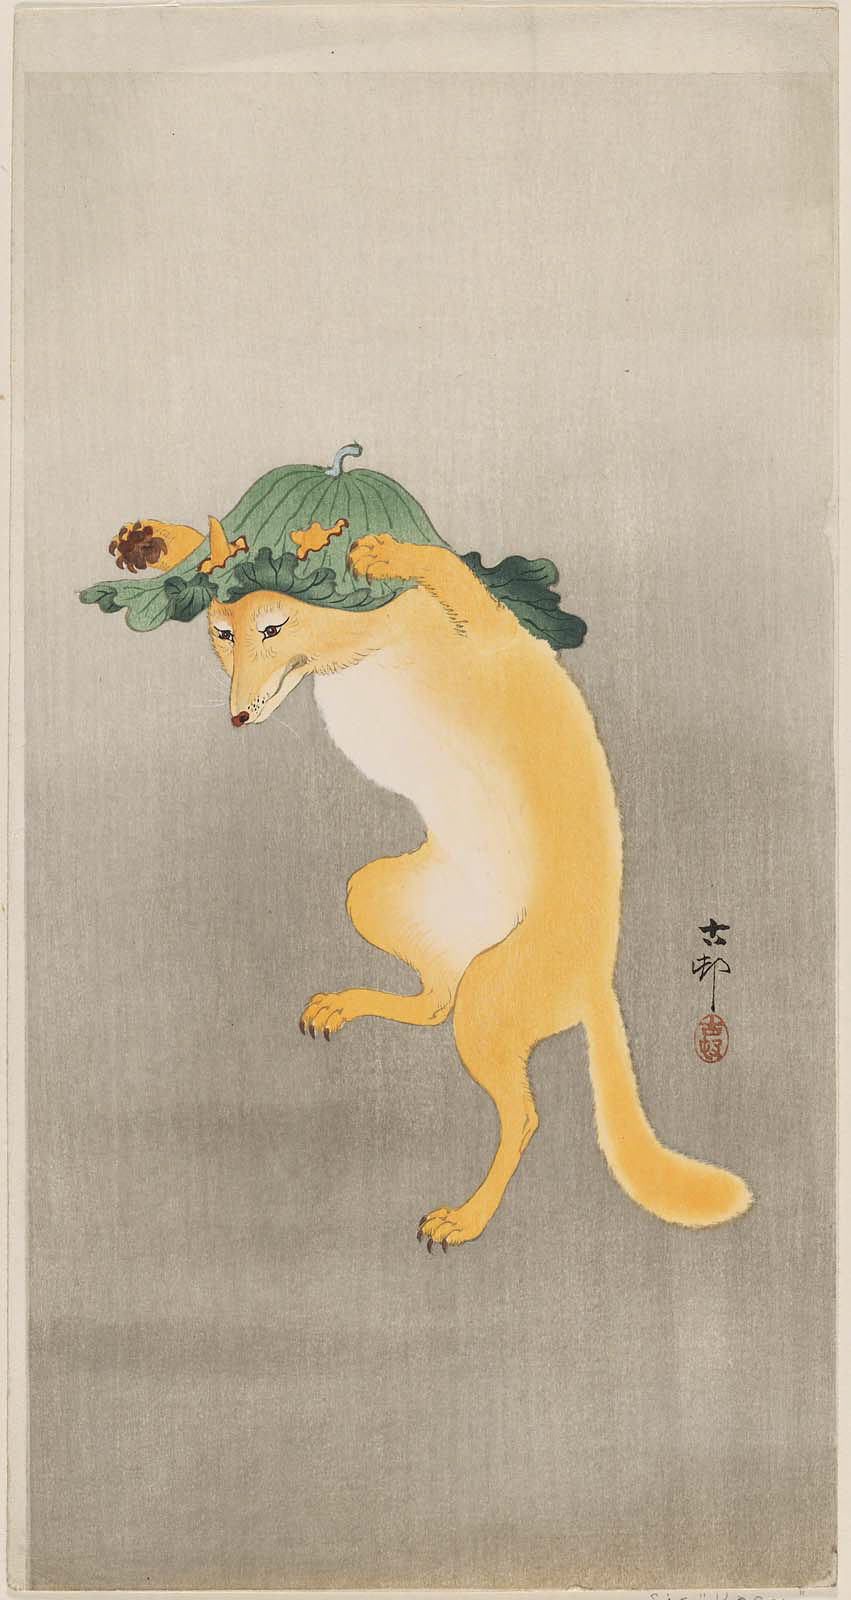 Dancing Fox with Lotus-leaf Hat by Ohara Koson - 1900s–1910s - 36.3 x 19 cm Museum of Fine Arts Boston